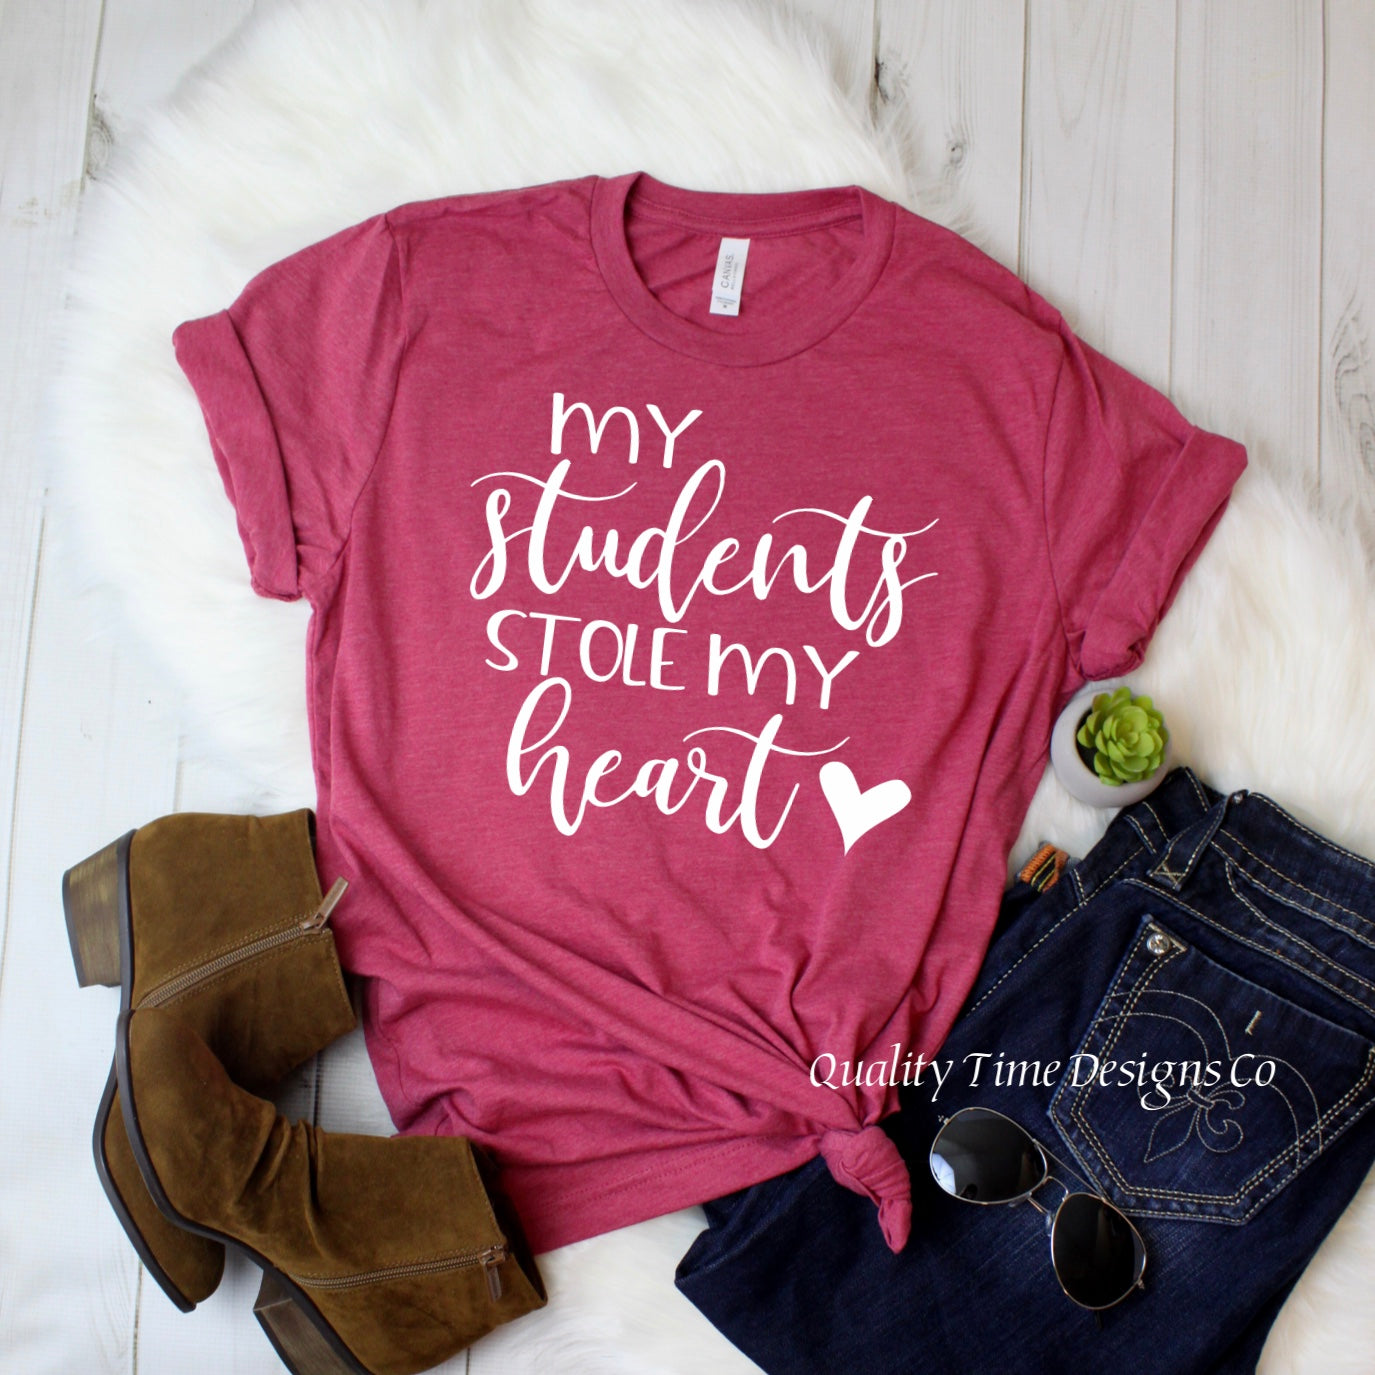 My students stole my heart t-shirt 